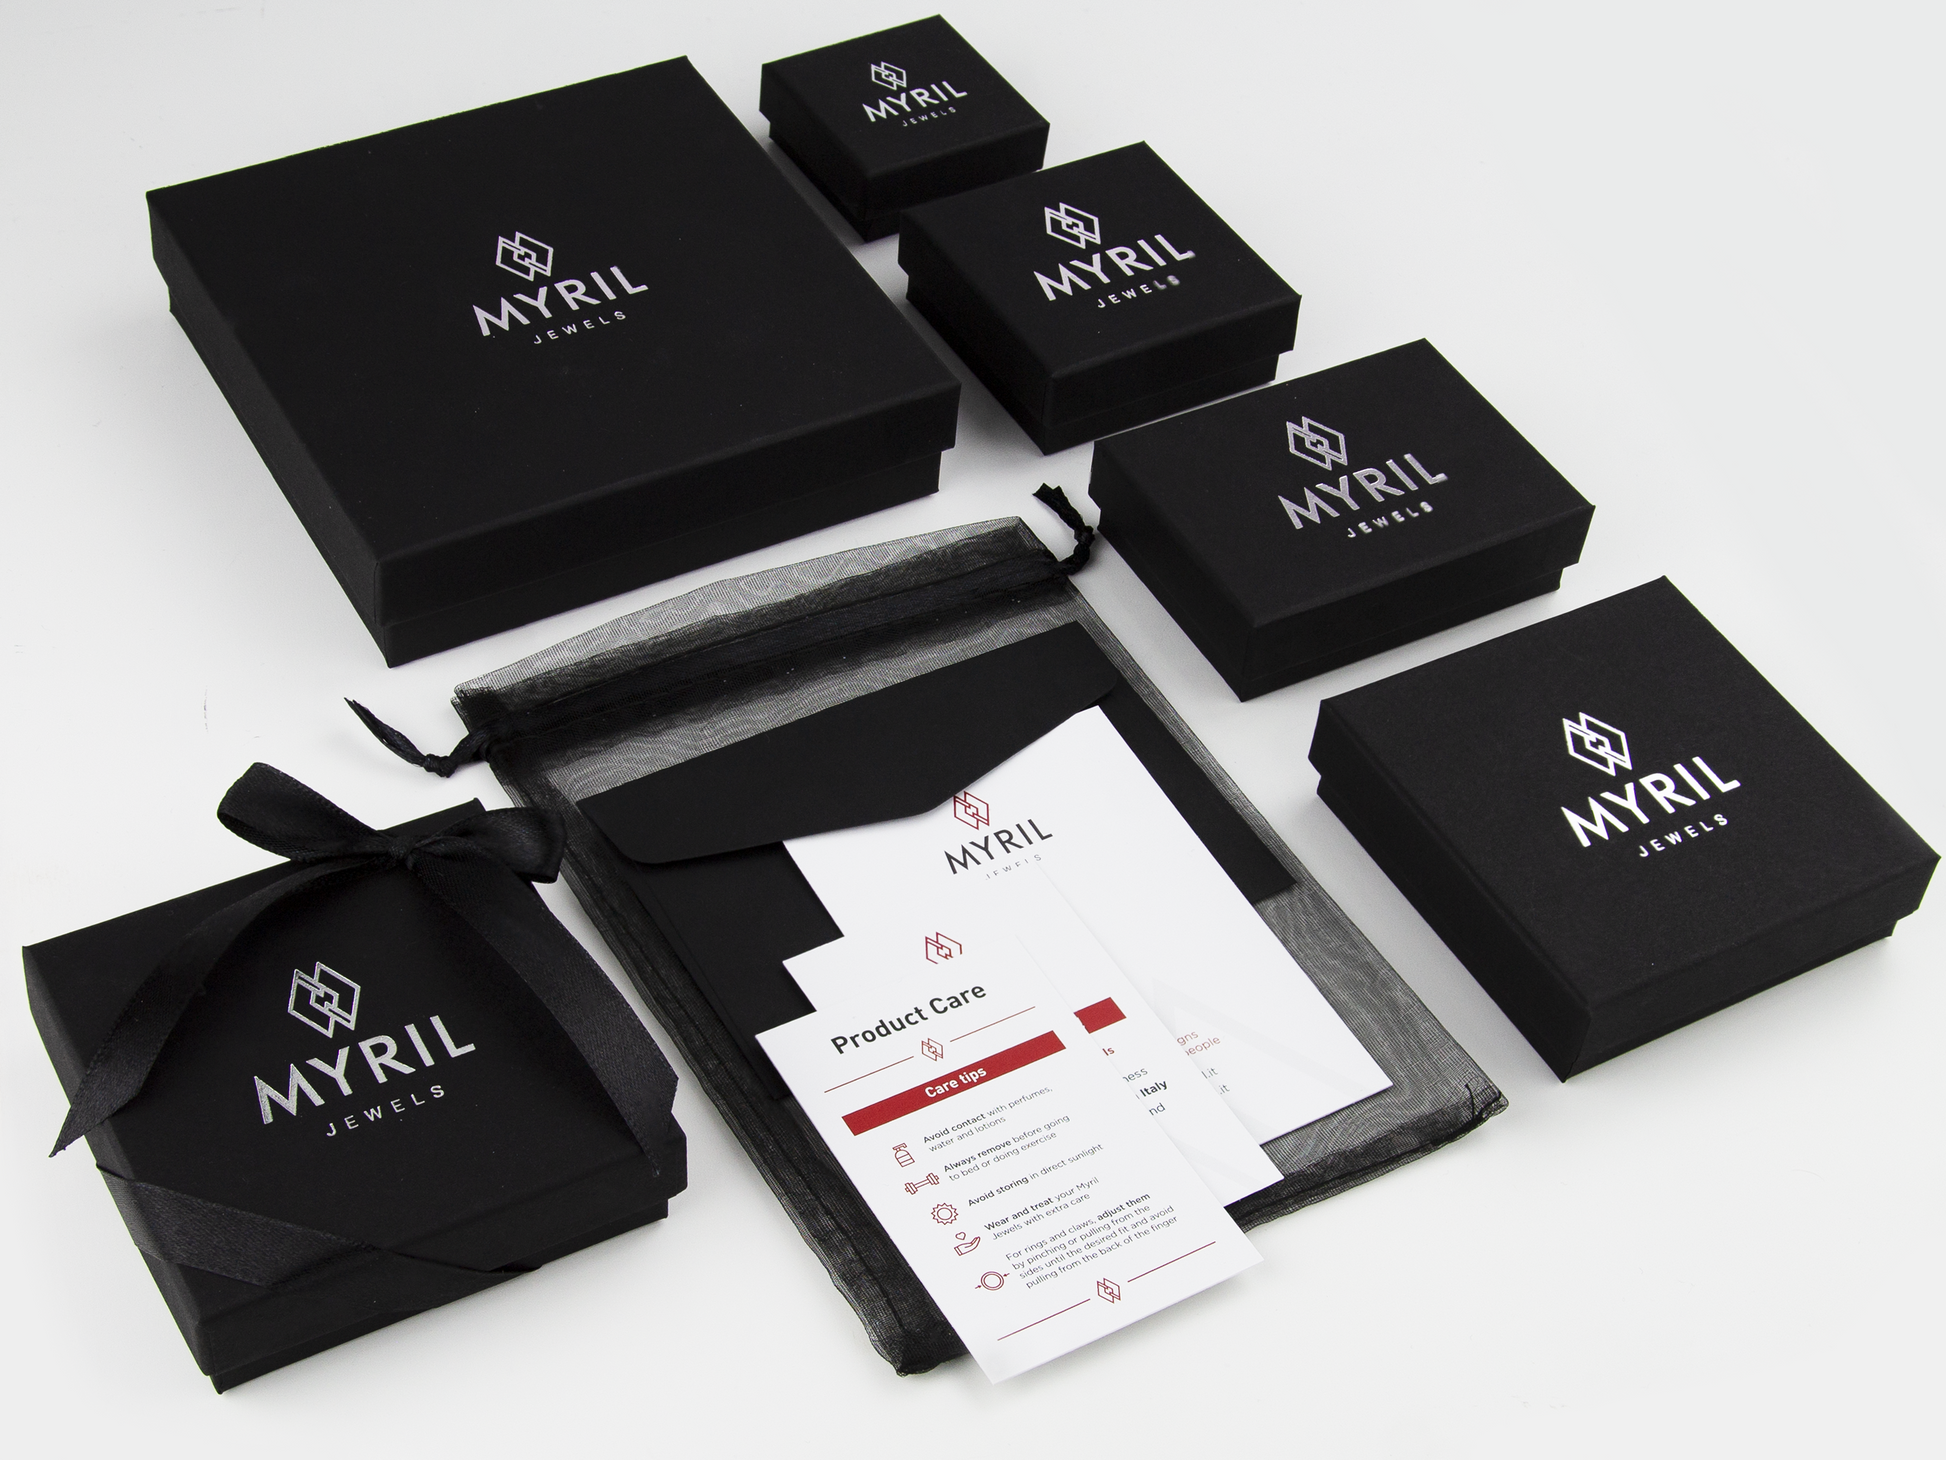 A variety of Myril Jewels brand packaging, showcasing sophisticated black boxes in multiple sizes adorned with the company's logo in silver. Included are care instructions and black organza gift bags, embodying an elegant goth jewelry presentation and branding.